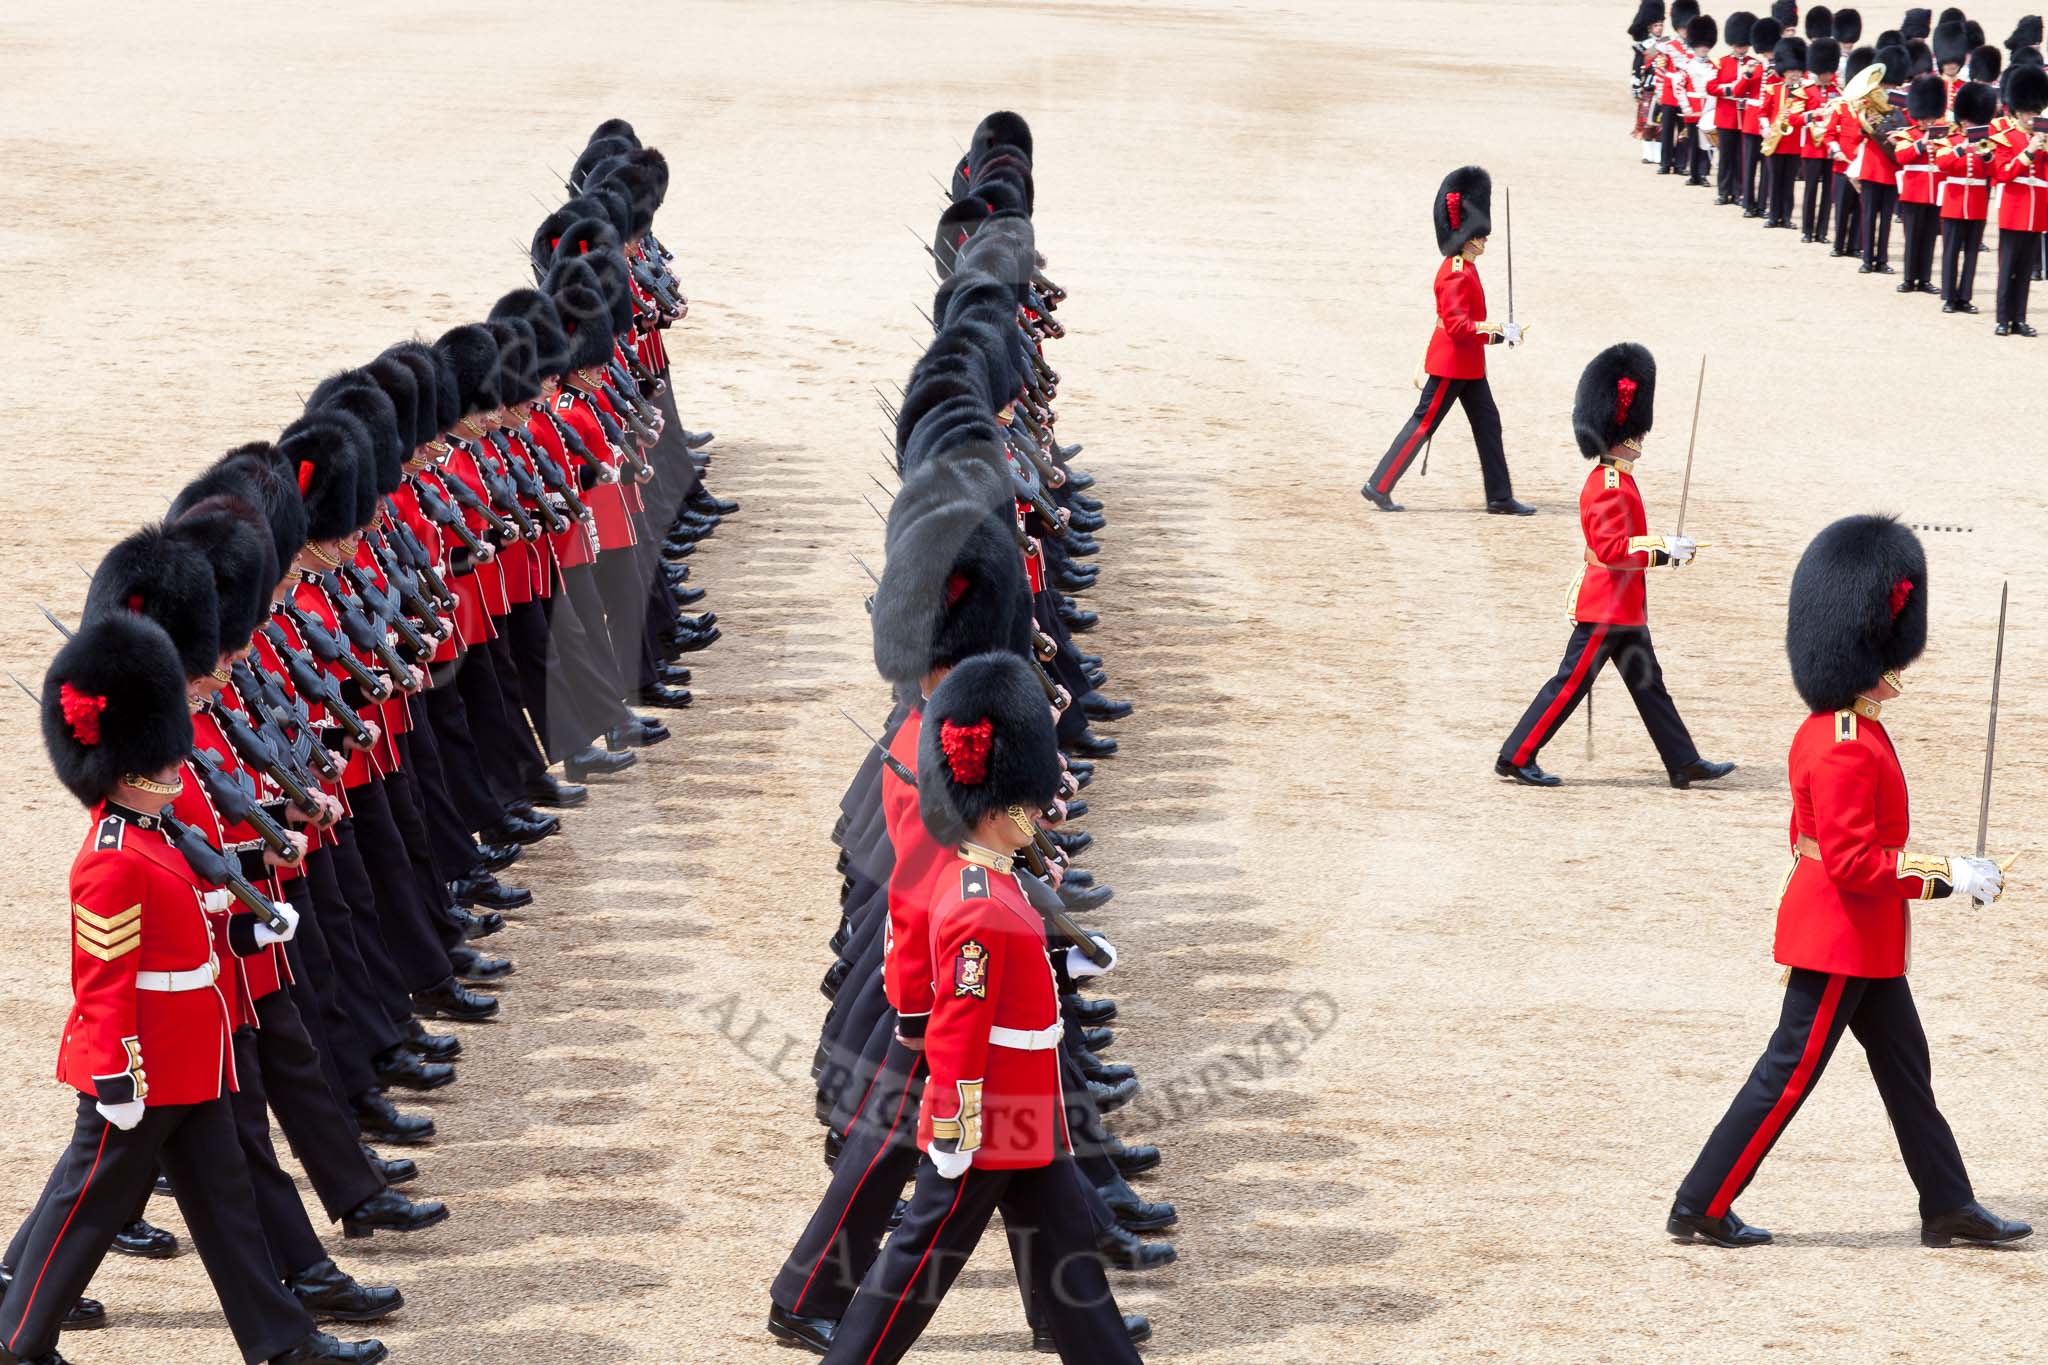 The Colonel's Review 2011: No. 6 Guard, No. 7 Company Coldstream Guards, during the March Past in slow time..
Horse Guards Parade, Westminster,
London SW1,

United Kingdom,
on 04 June 2011 at 11:38, image #179